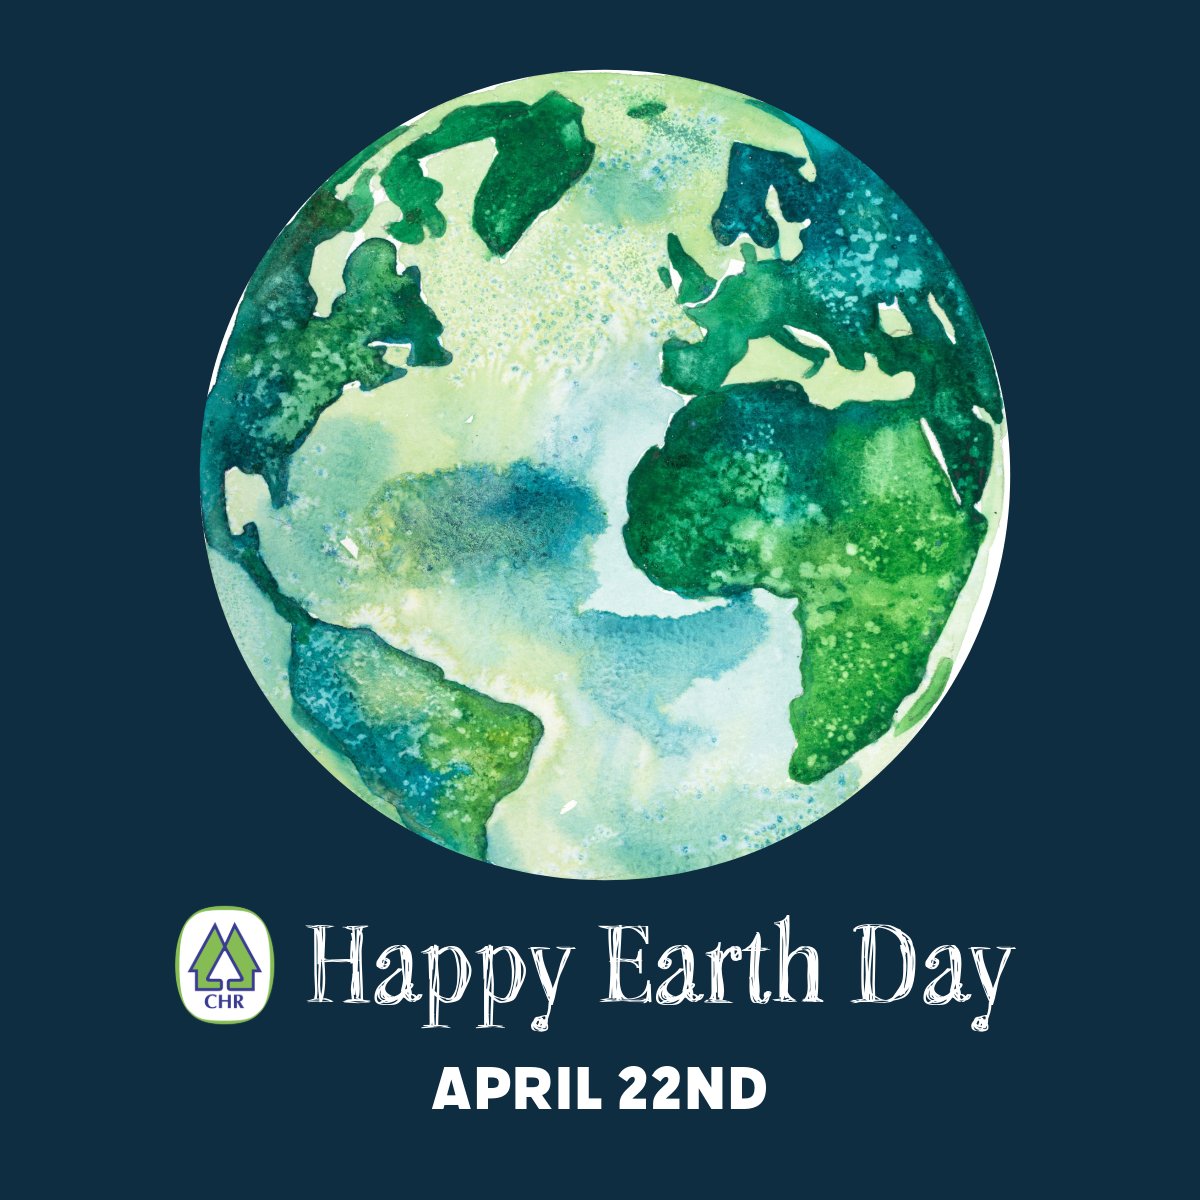 CHR Cambridge and Chestnut Hill Realty are proud to practice and support conservation efforts today – Earth Day – and every day. Our #NaturePositive initiative highlights all that we do to protect the environment. 🌏🍀♻️
👉 Check it out: chr-apartments.com/nature-positiv…
#EarthDay...